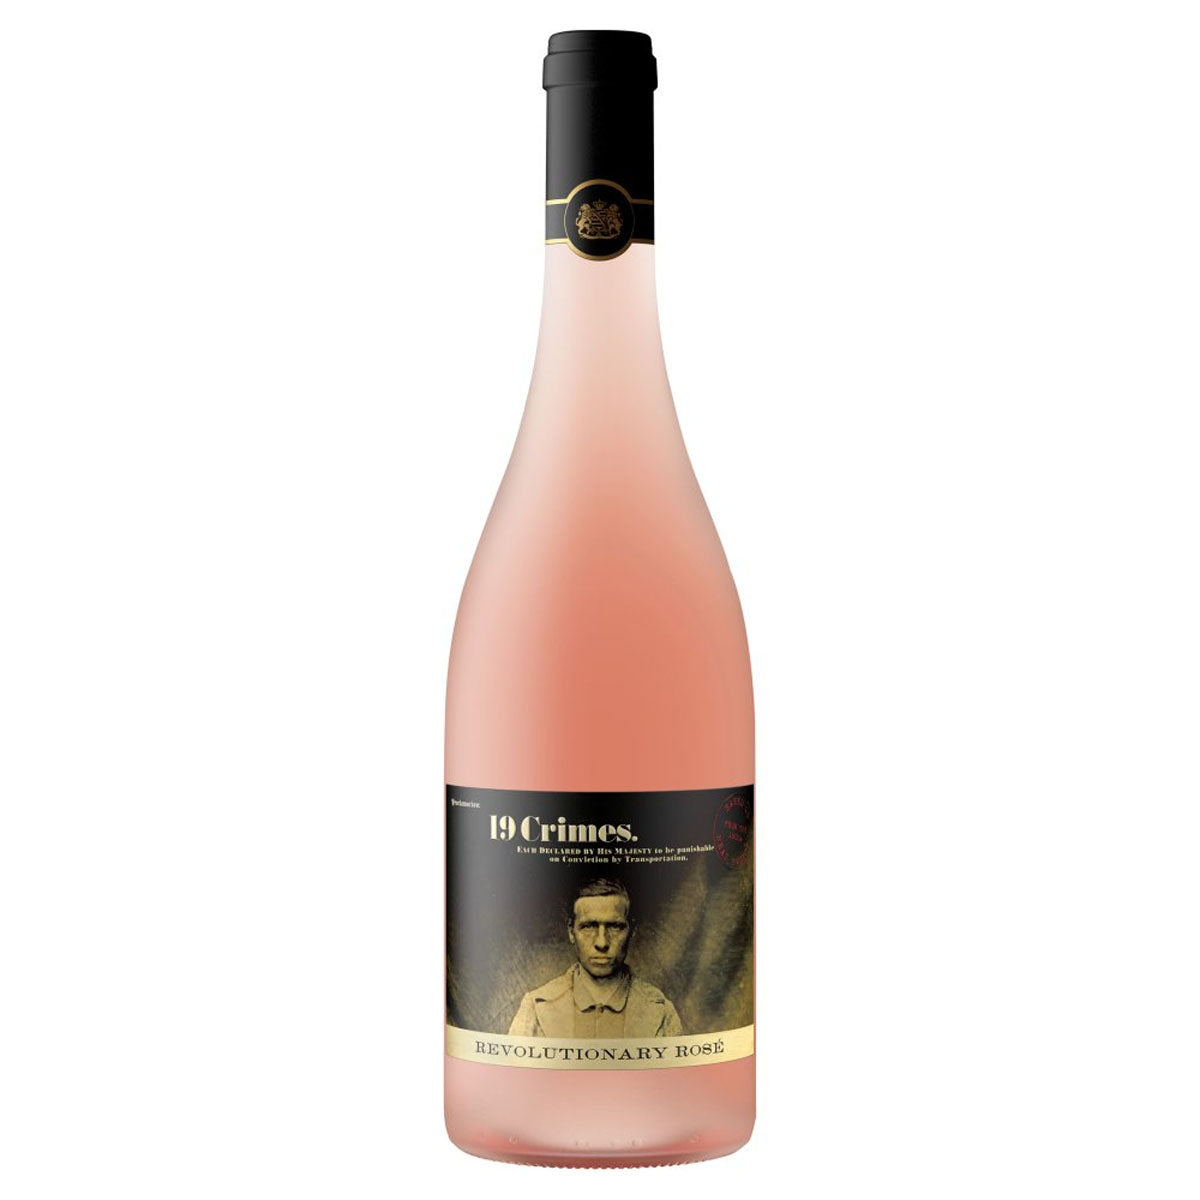 A bottle of 19 Crimes - Revolutionary Rose (13.5% ABV) - 750ml with an image of a man.